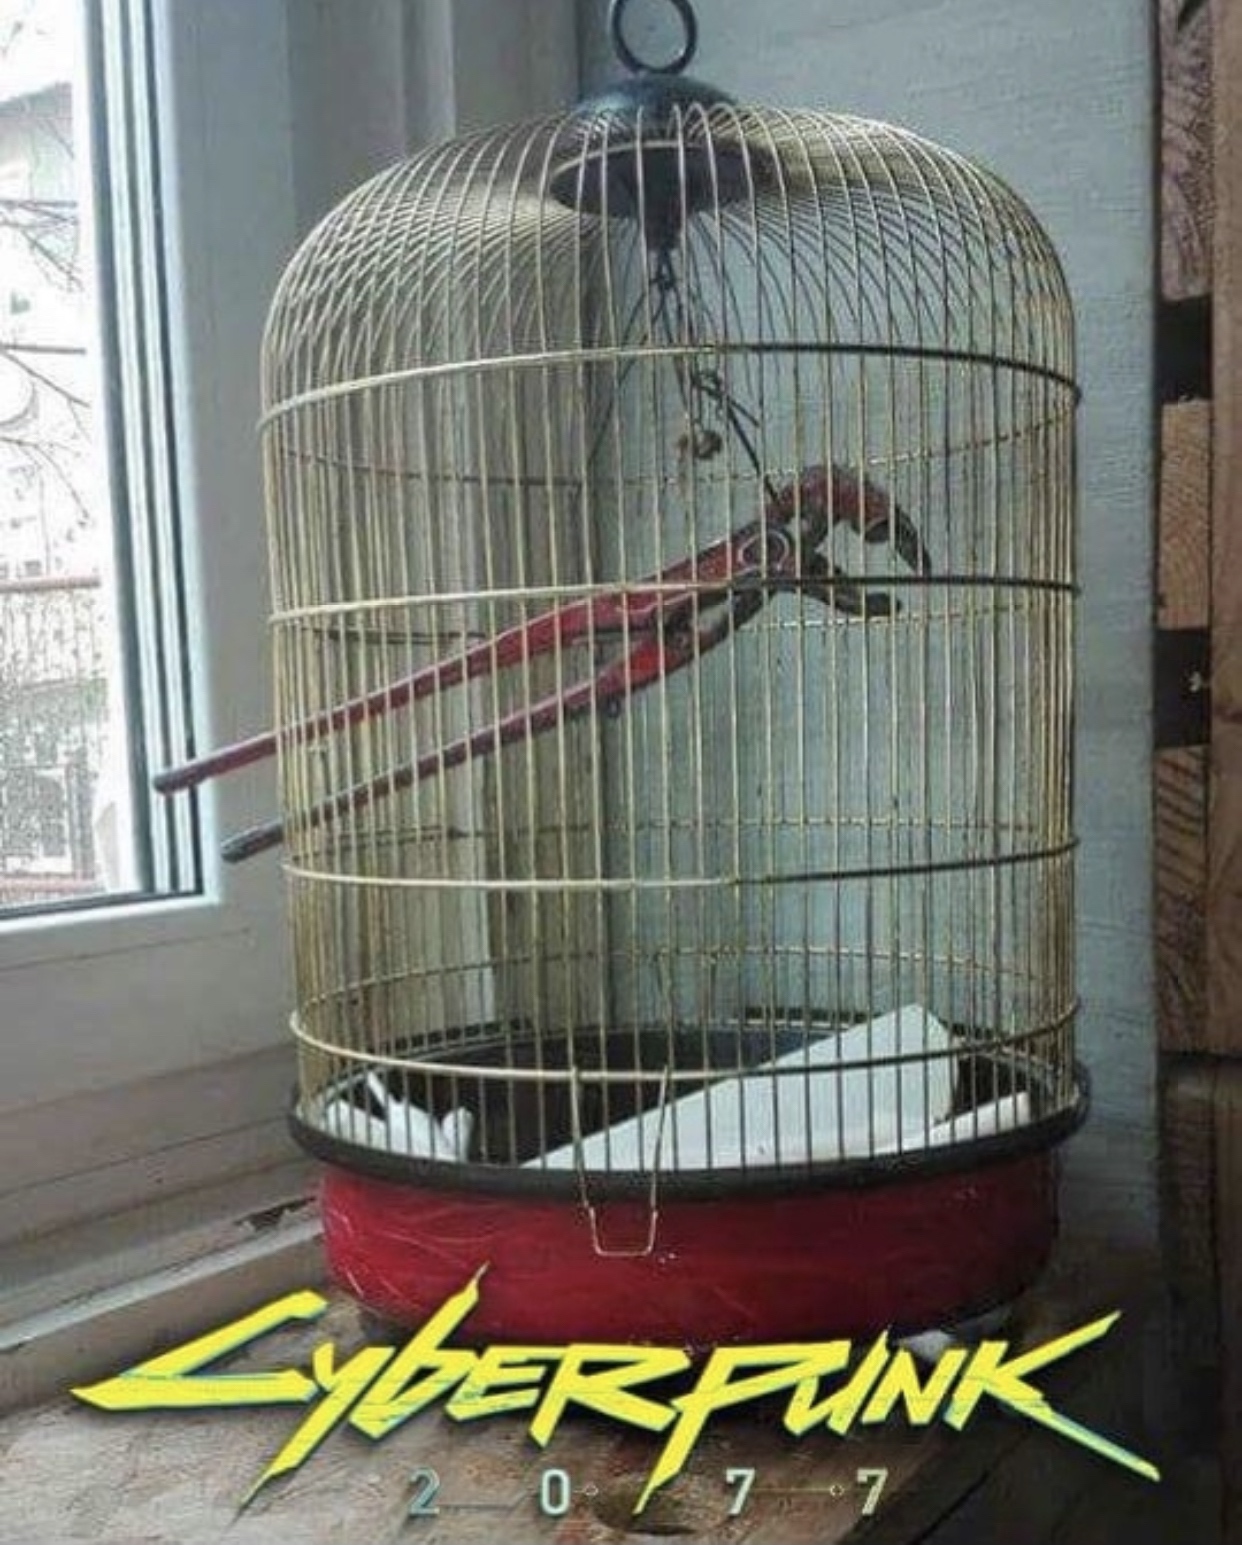 cyberpunk 2077 - meme - birdcage with a wrench